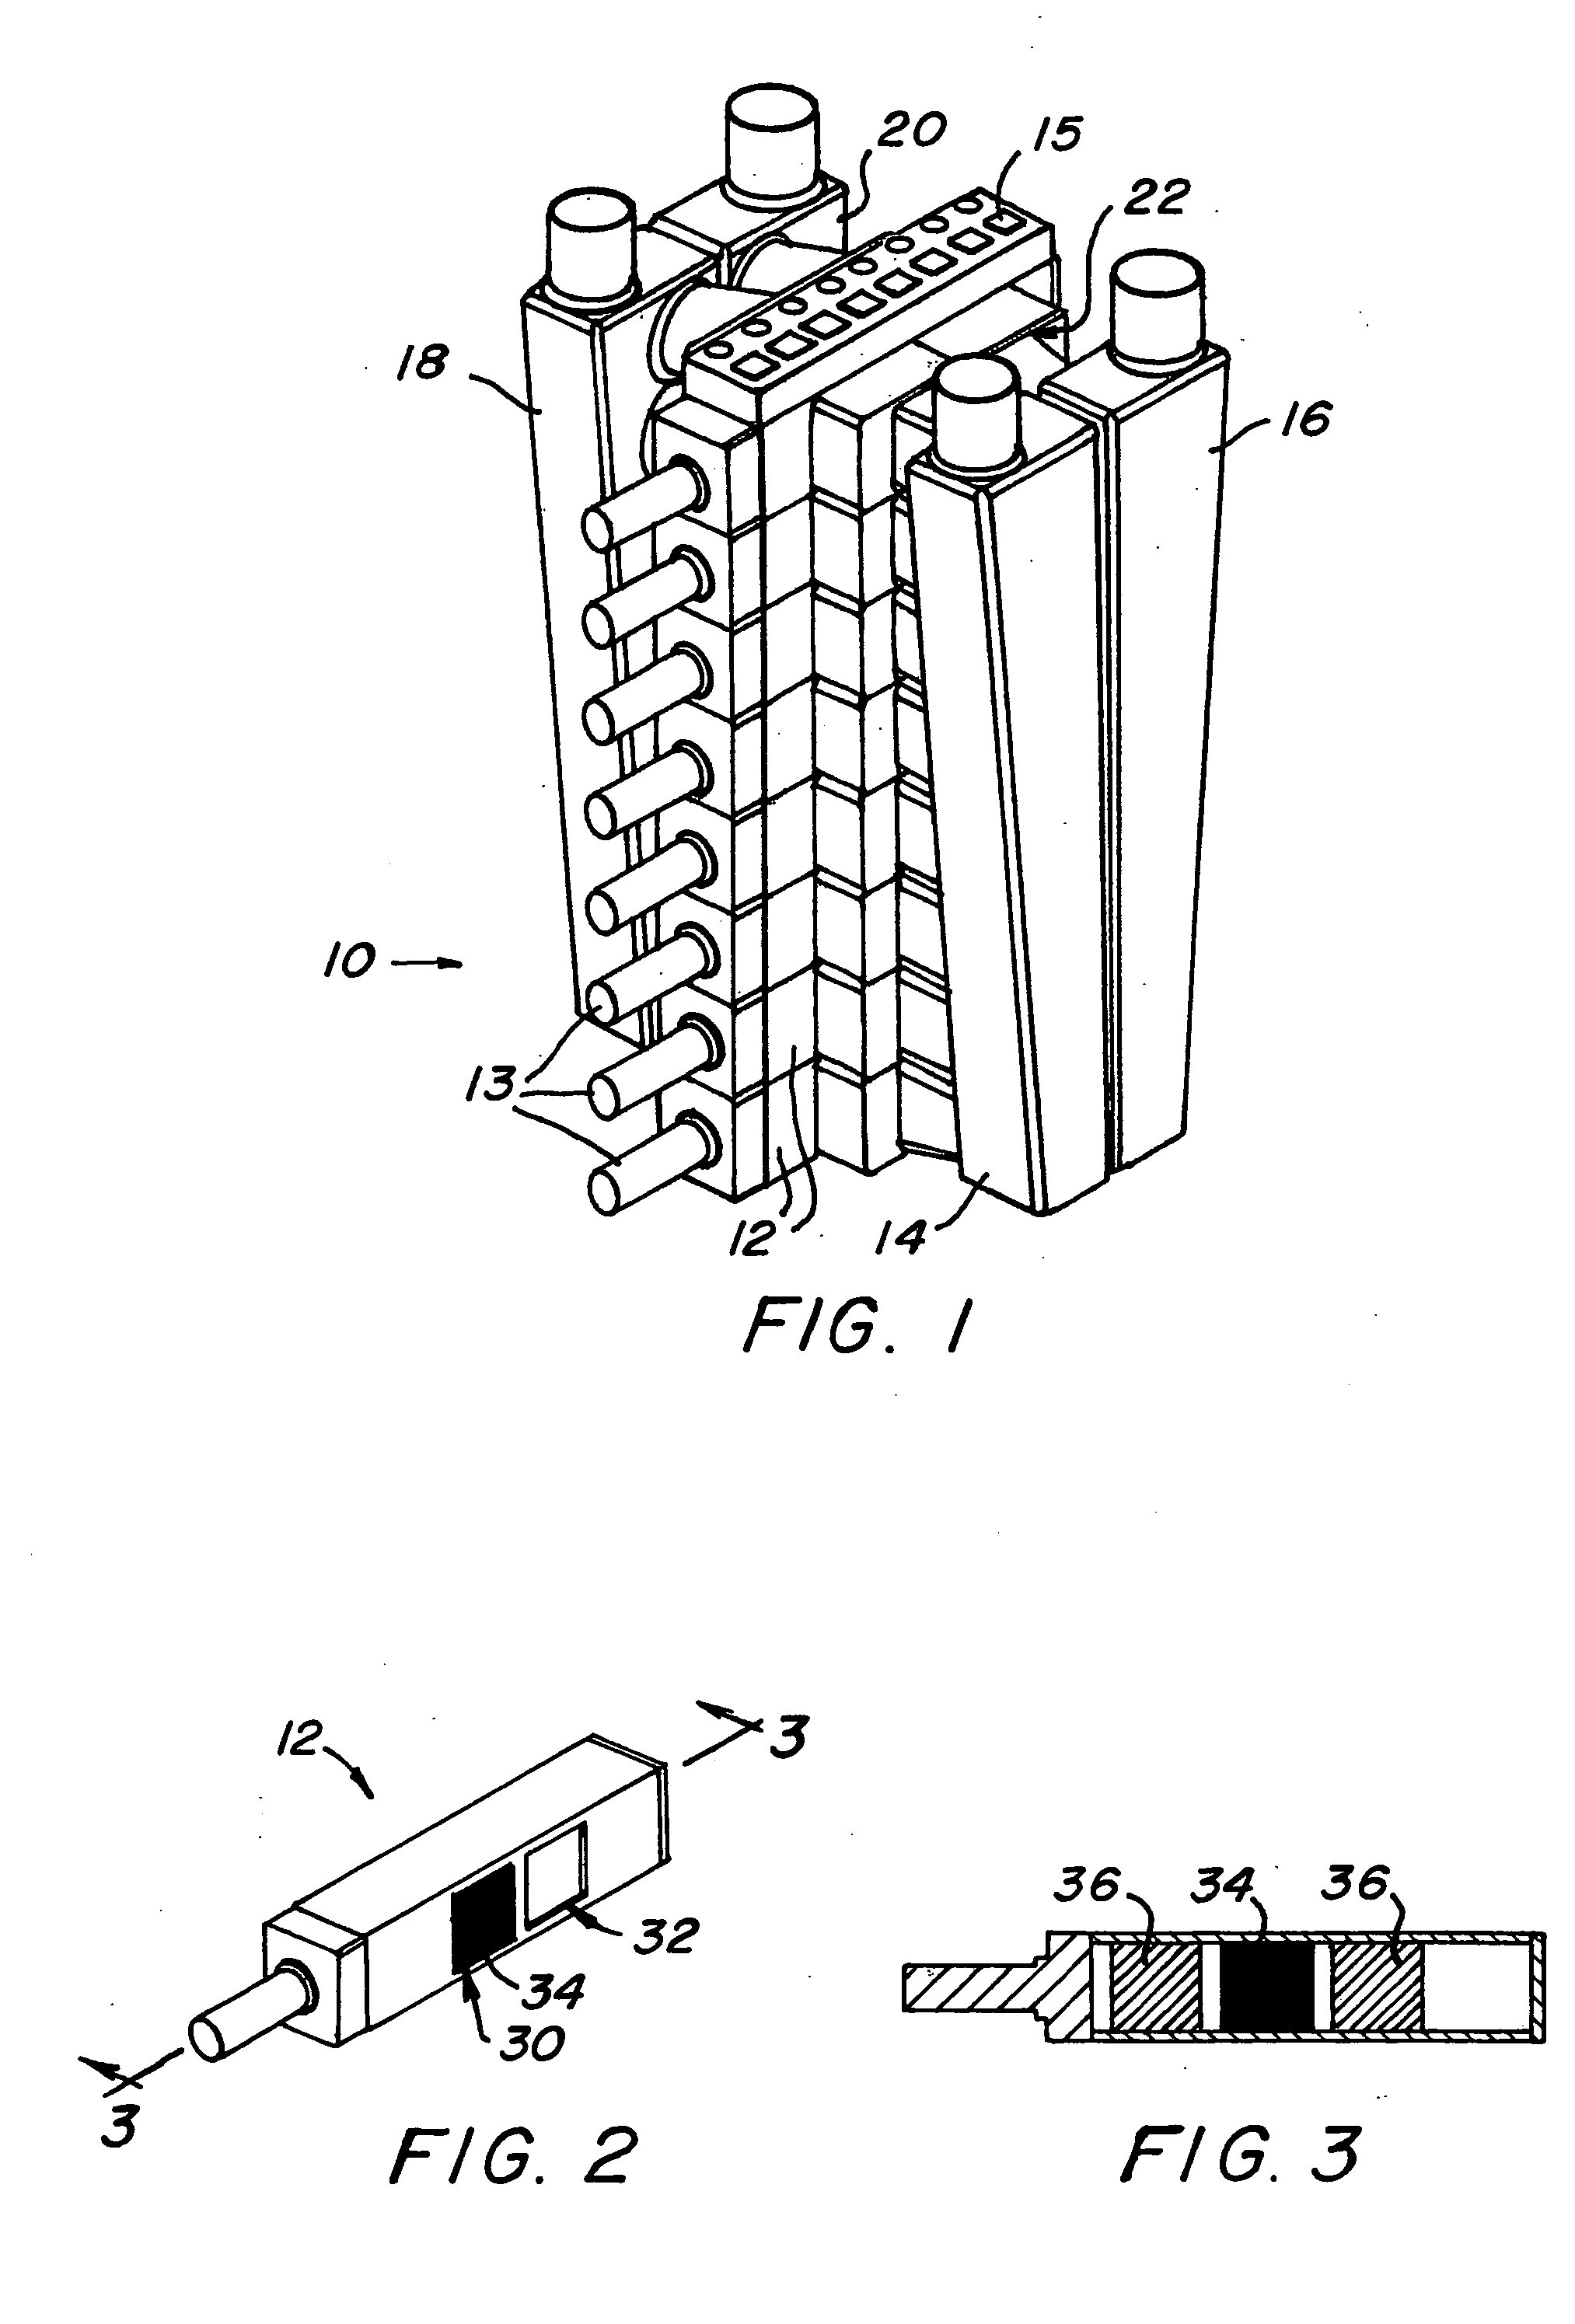 Variable area mass or area and mass species transfer device and method